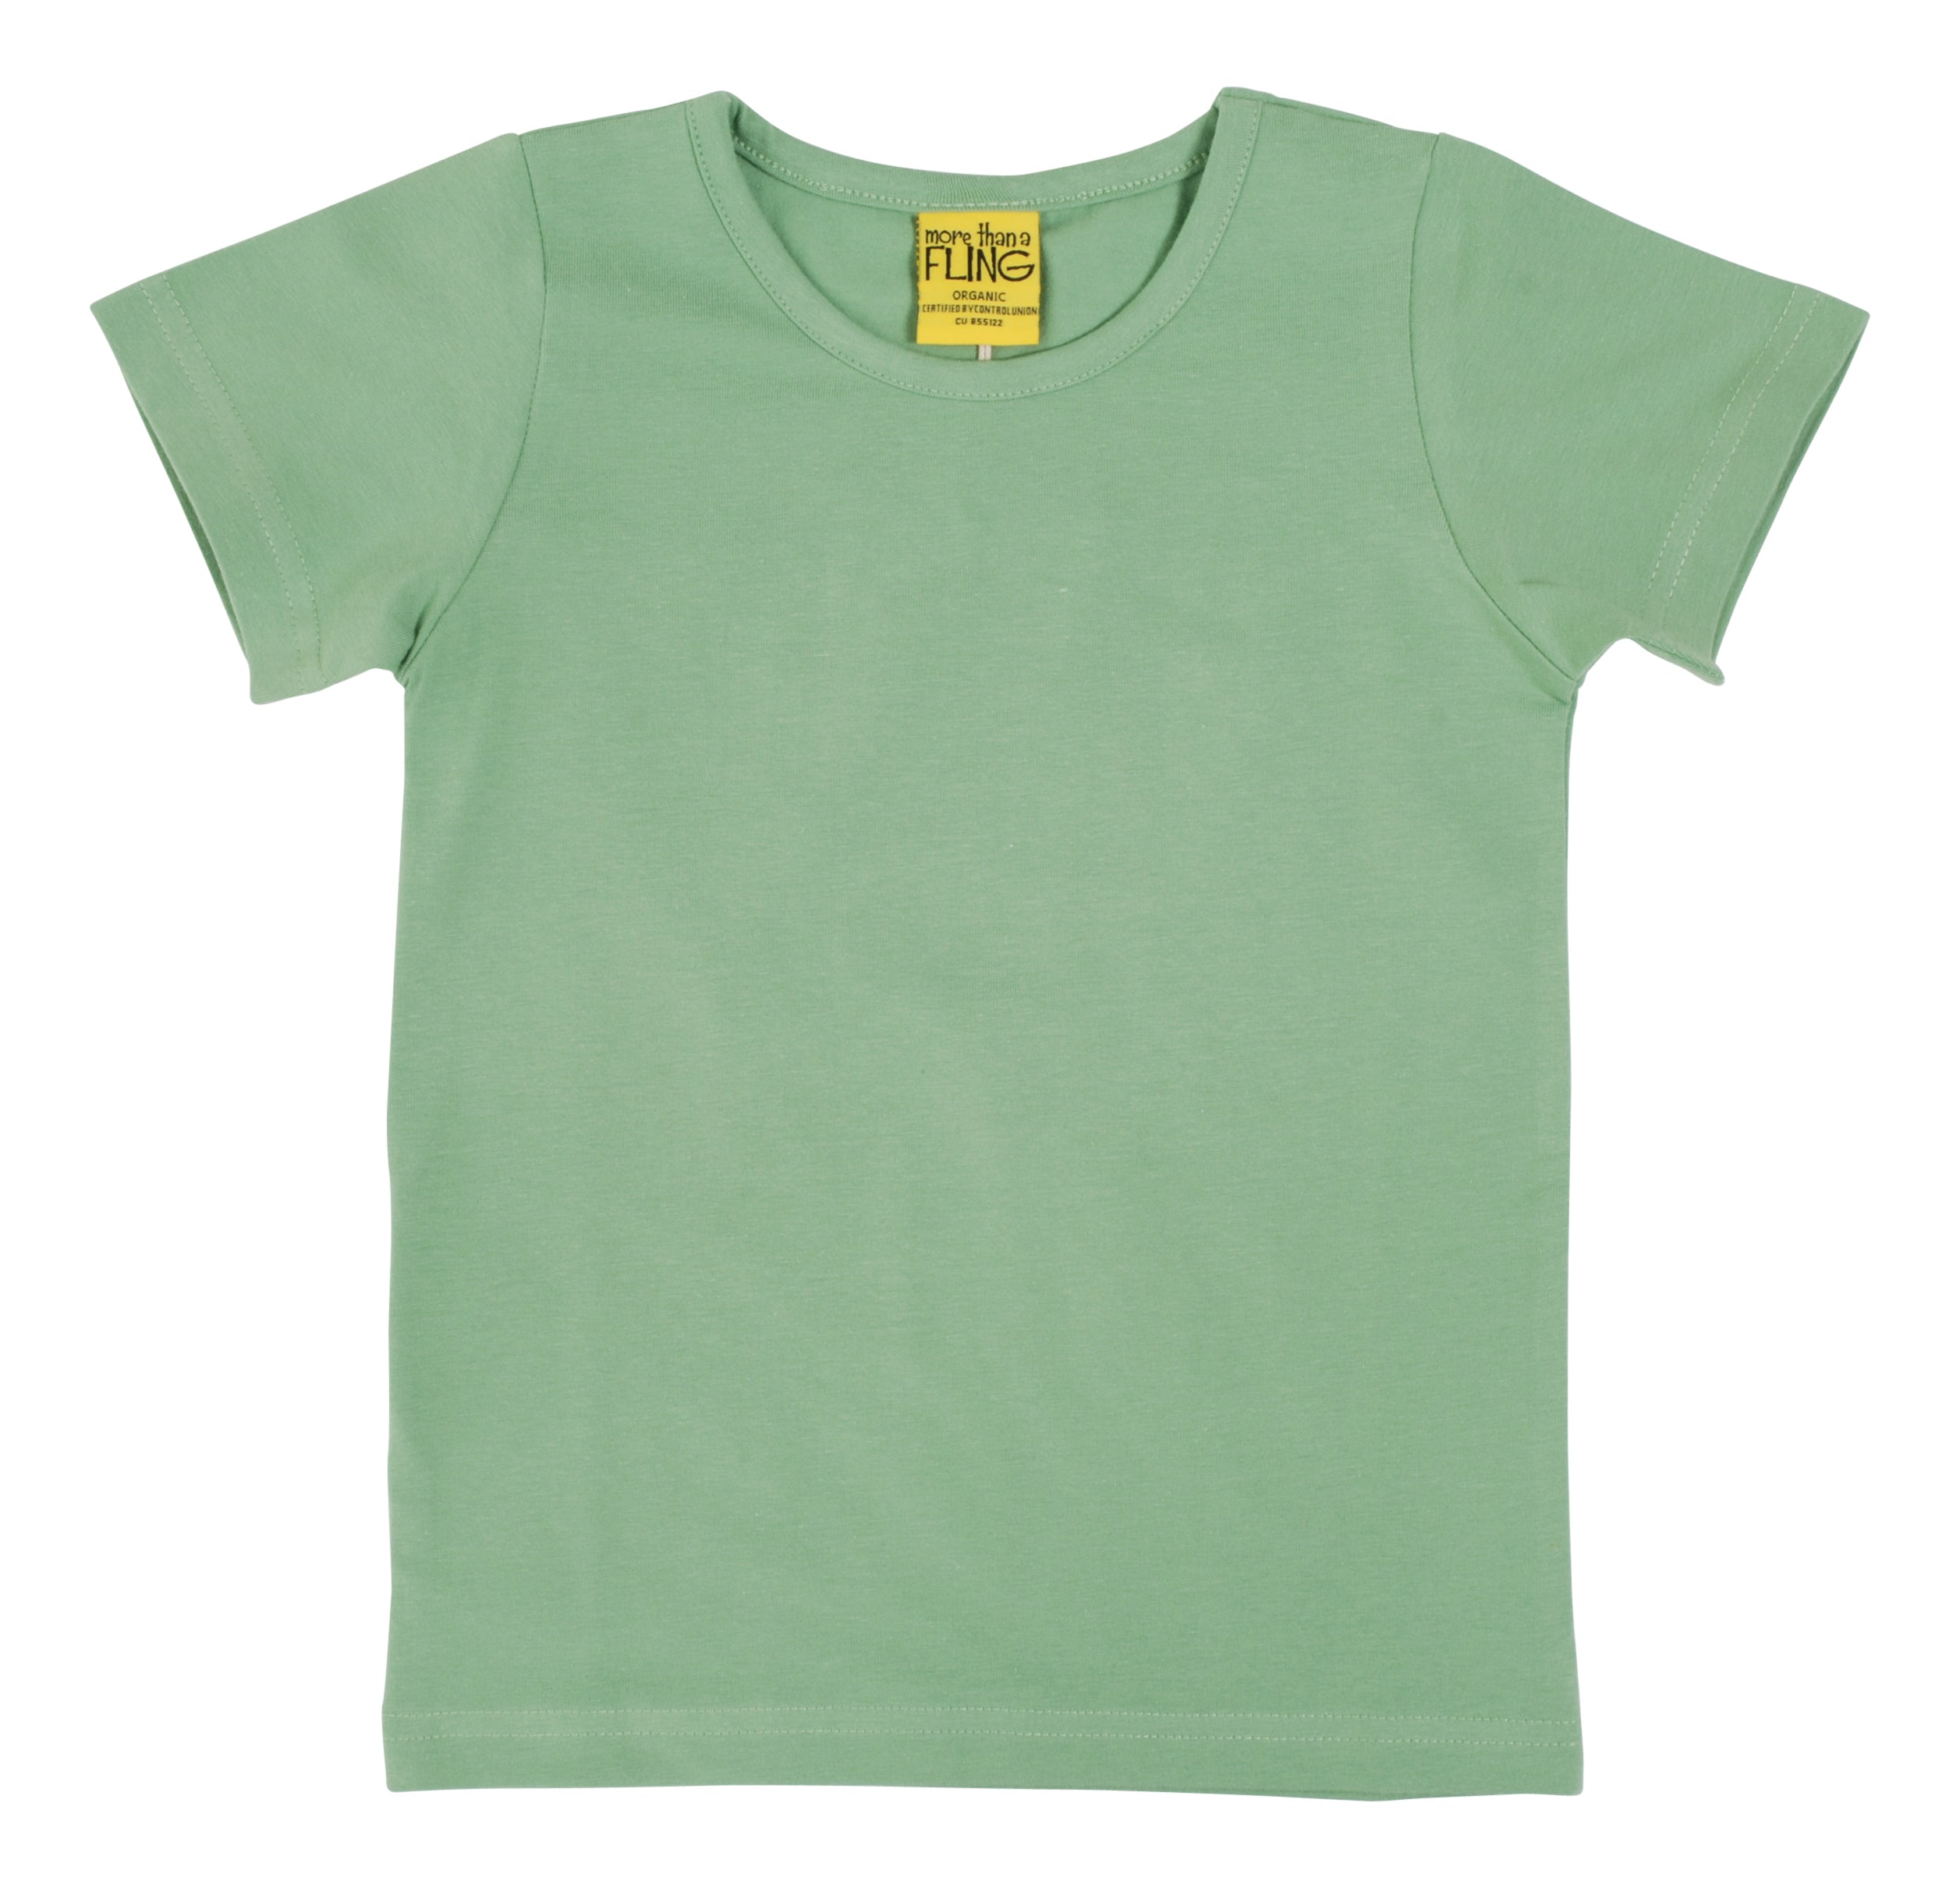 More Than A Fling - SS Tee - Mineral Green